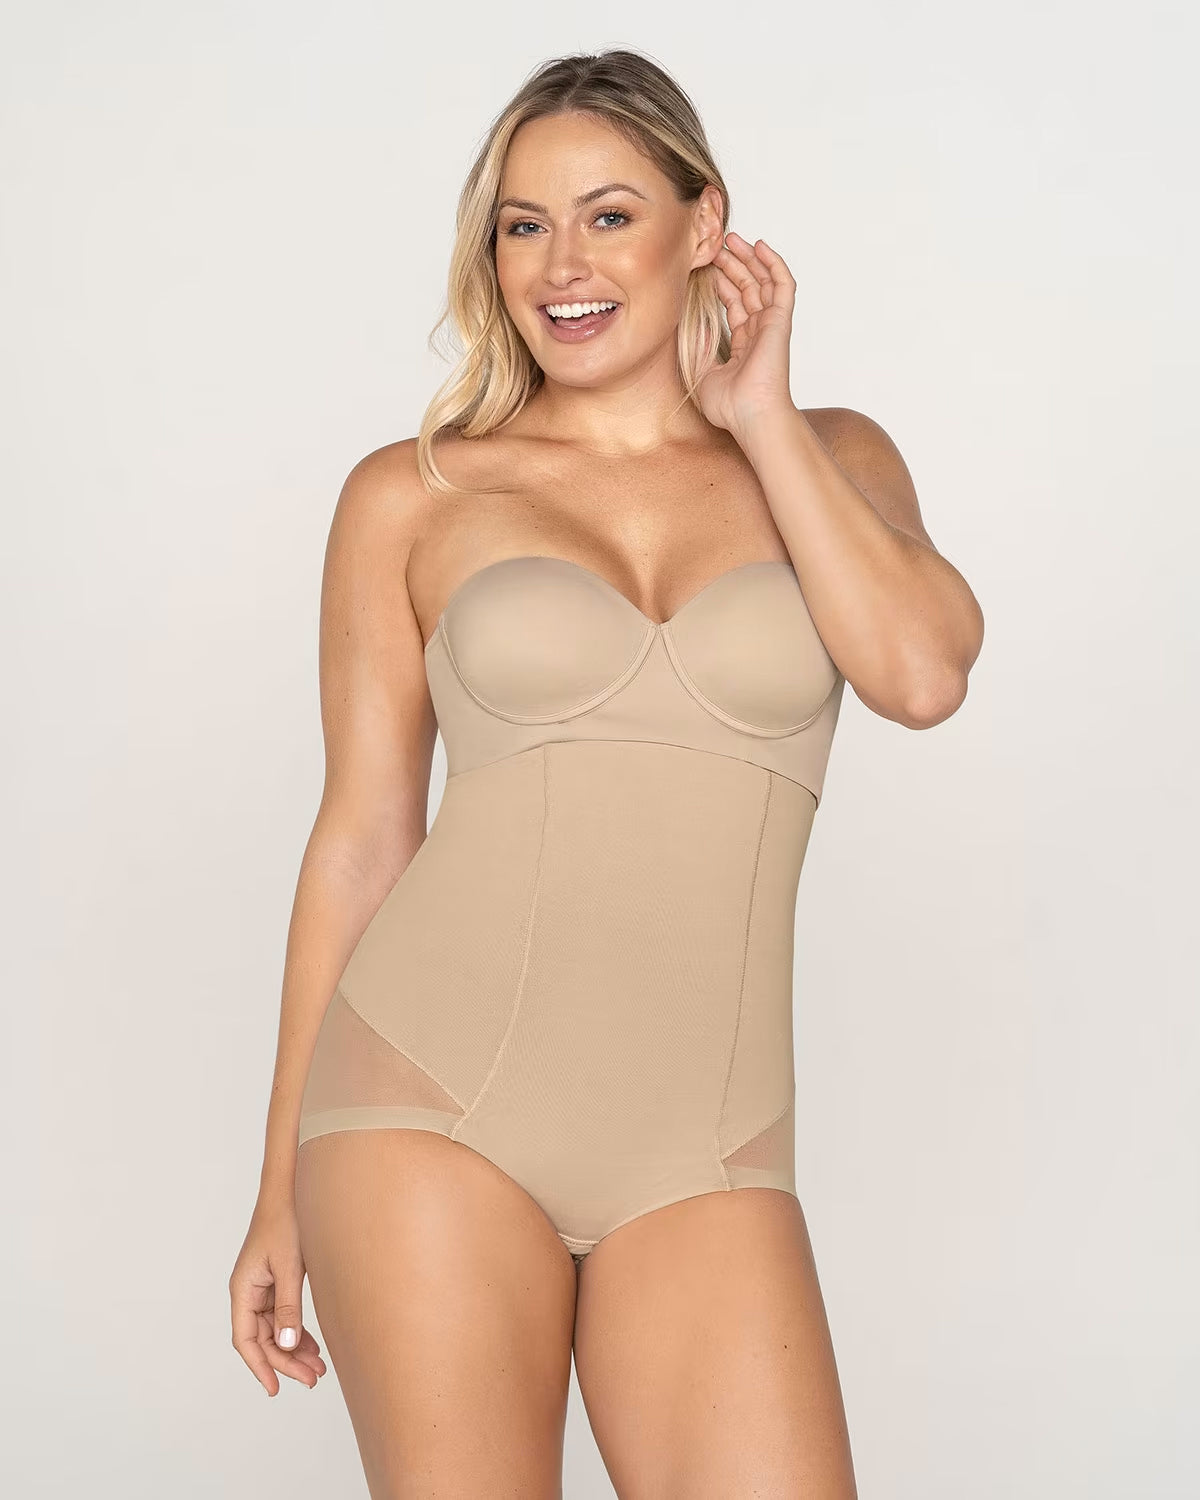 Belle Lacet Lingerie: Elevating Your Sleep & Loungewear Game